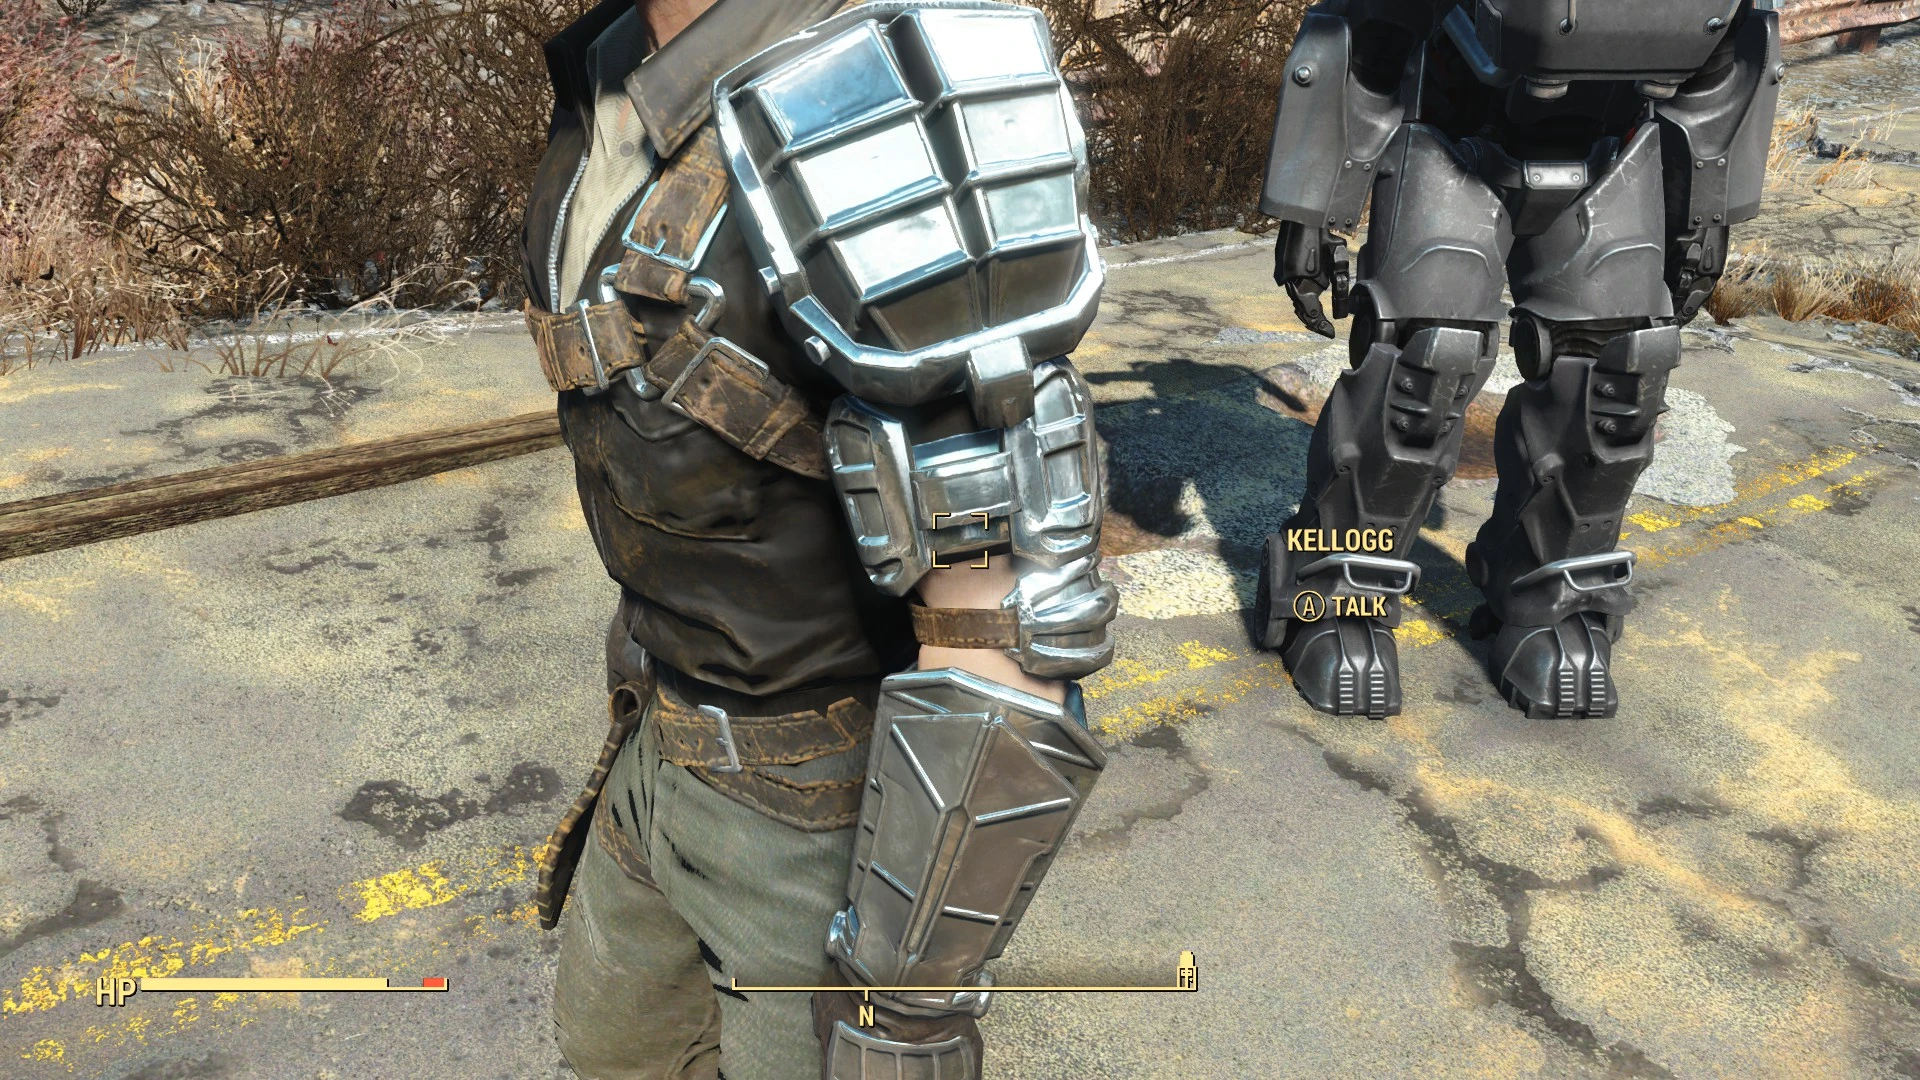 Gallery of Heavy Synth Armor Fallout 4.